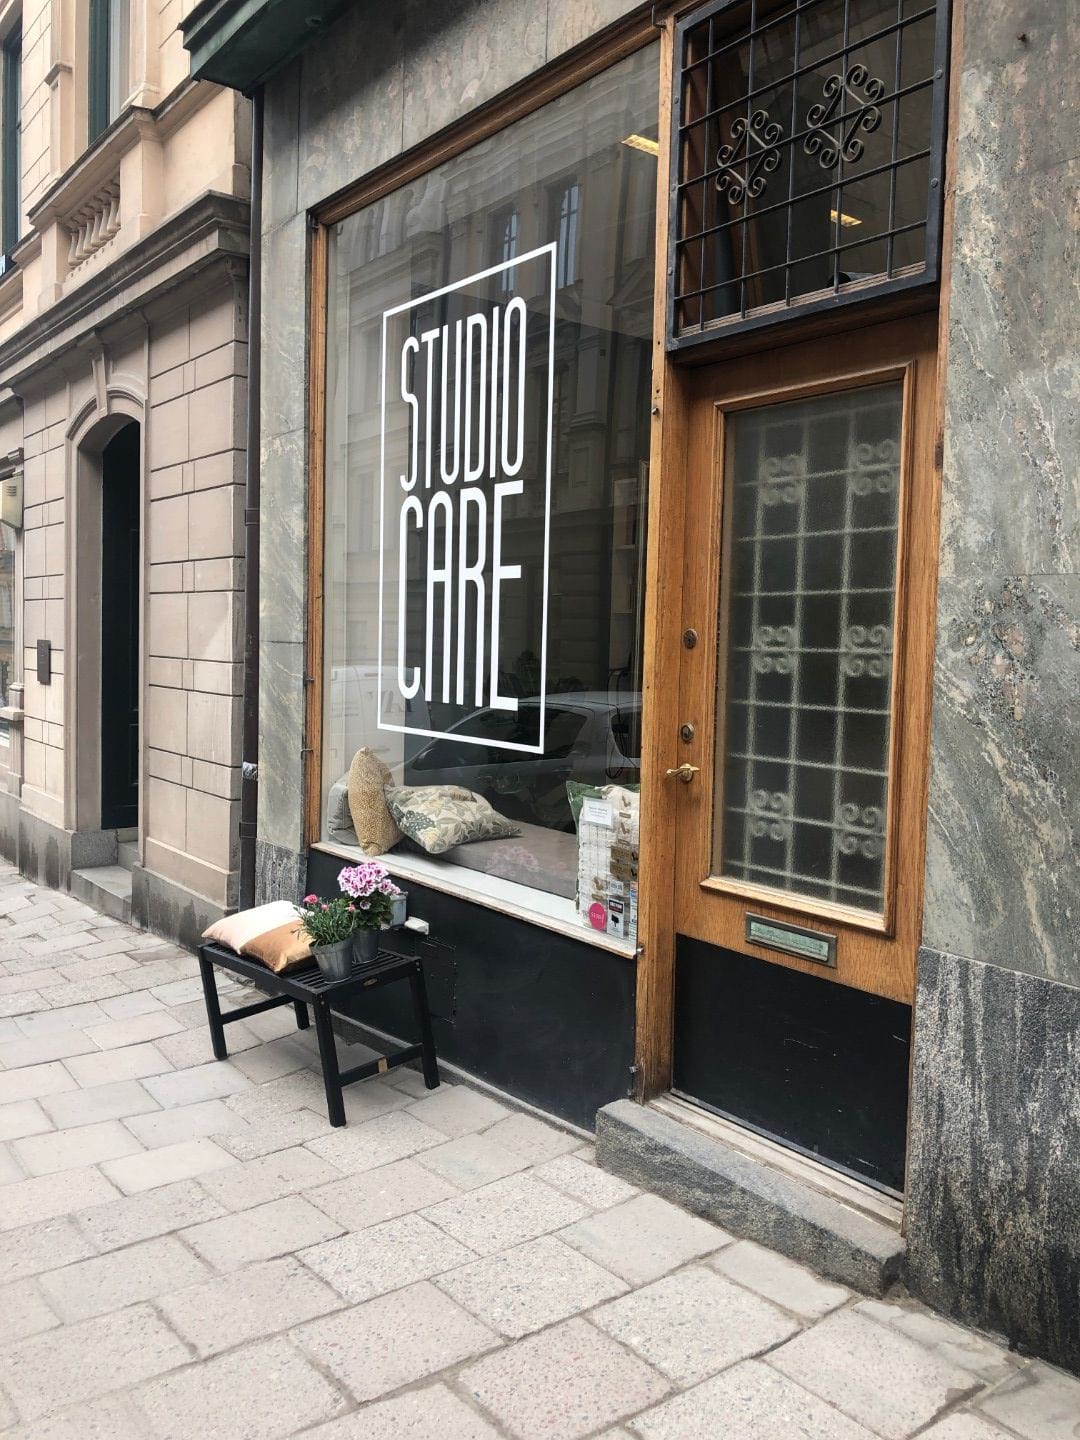 Photo from StudioCare by Ida B. (29/04/2019)